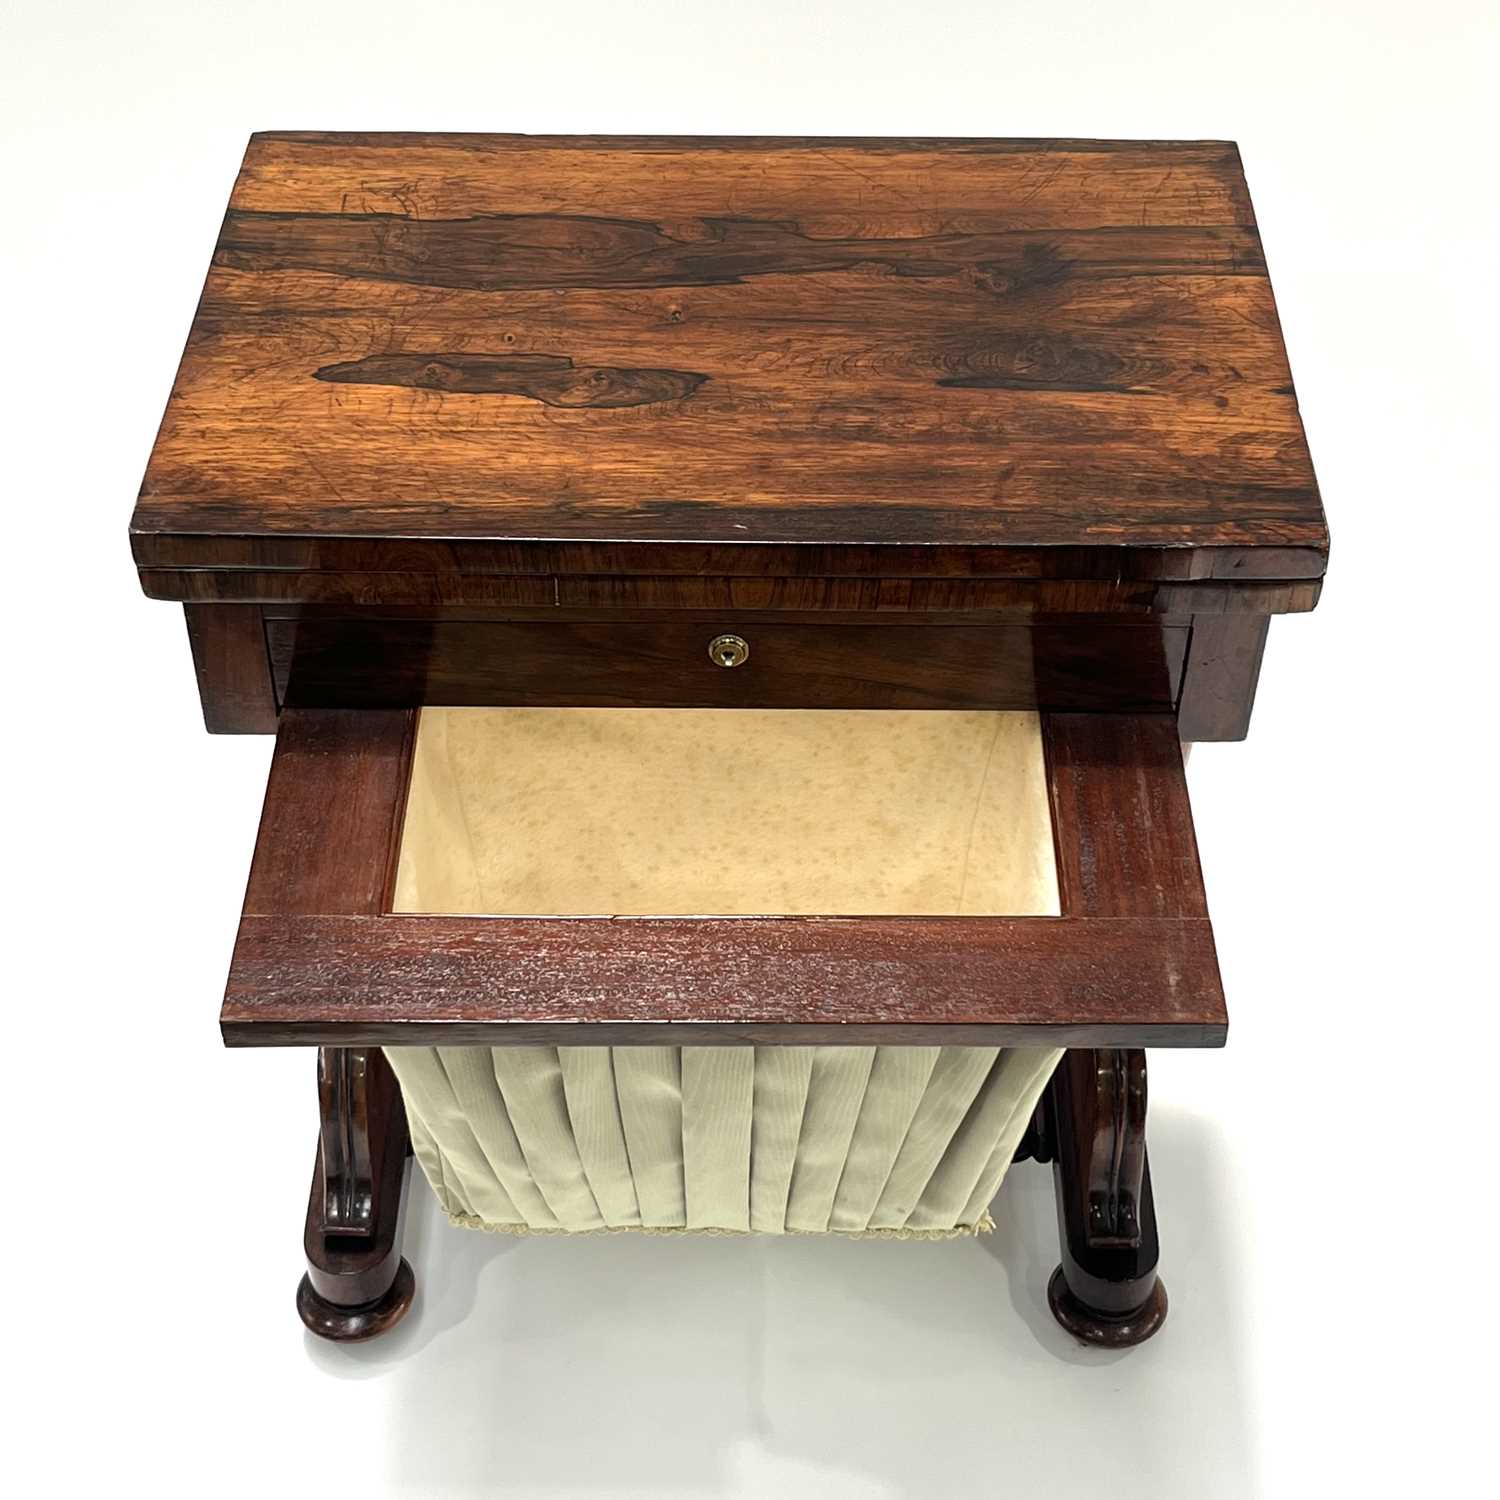 A Regency rosewood work and games table combined, circa 1820, fold-over top with green baize lining, - Image 5 of 6